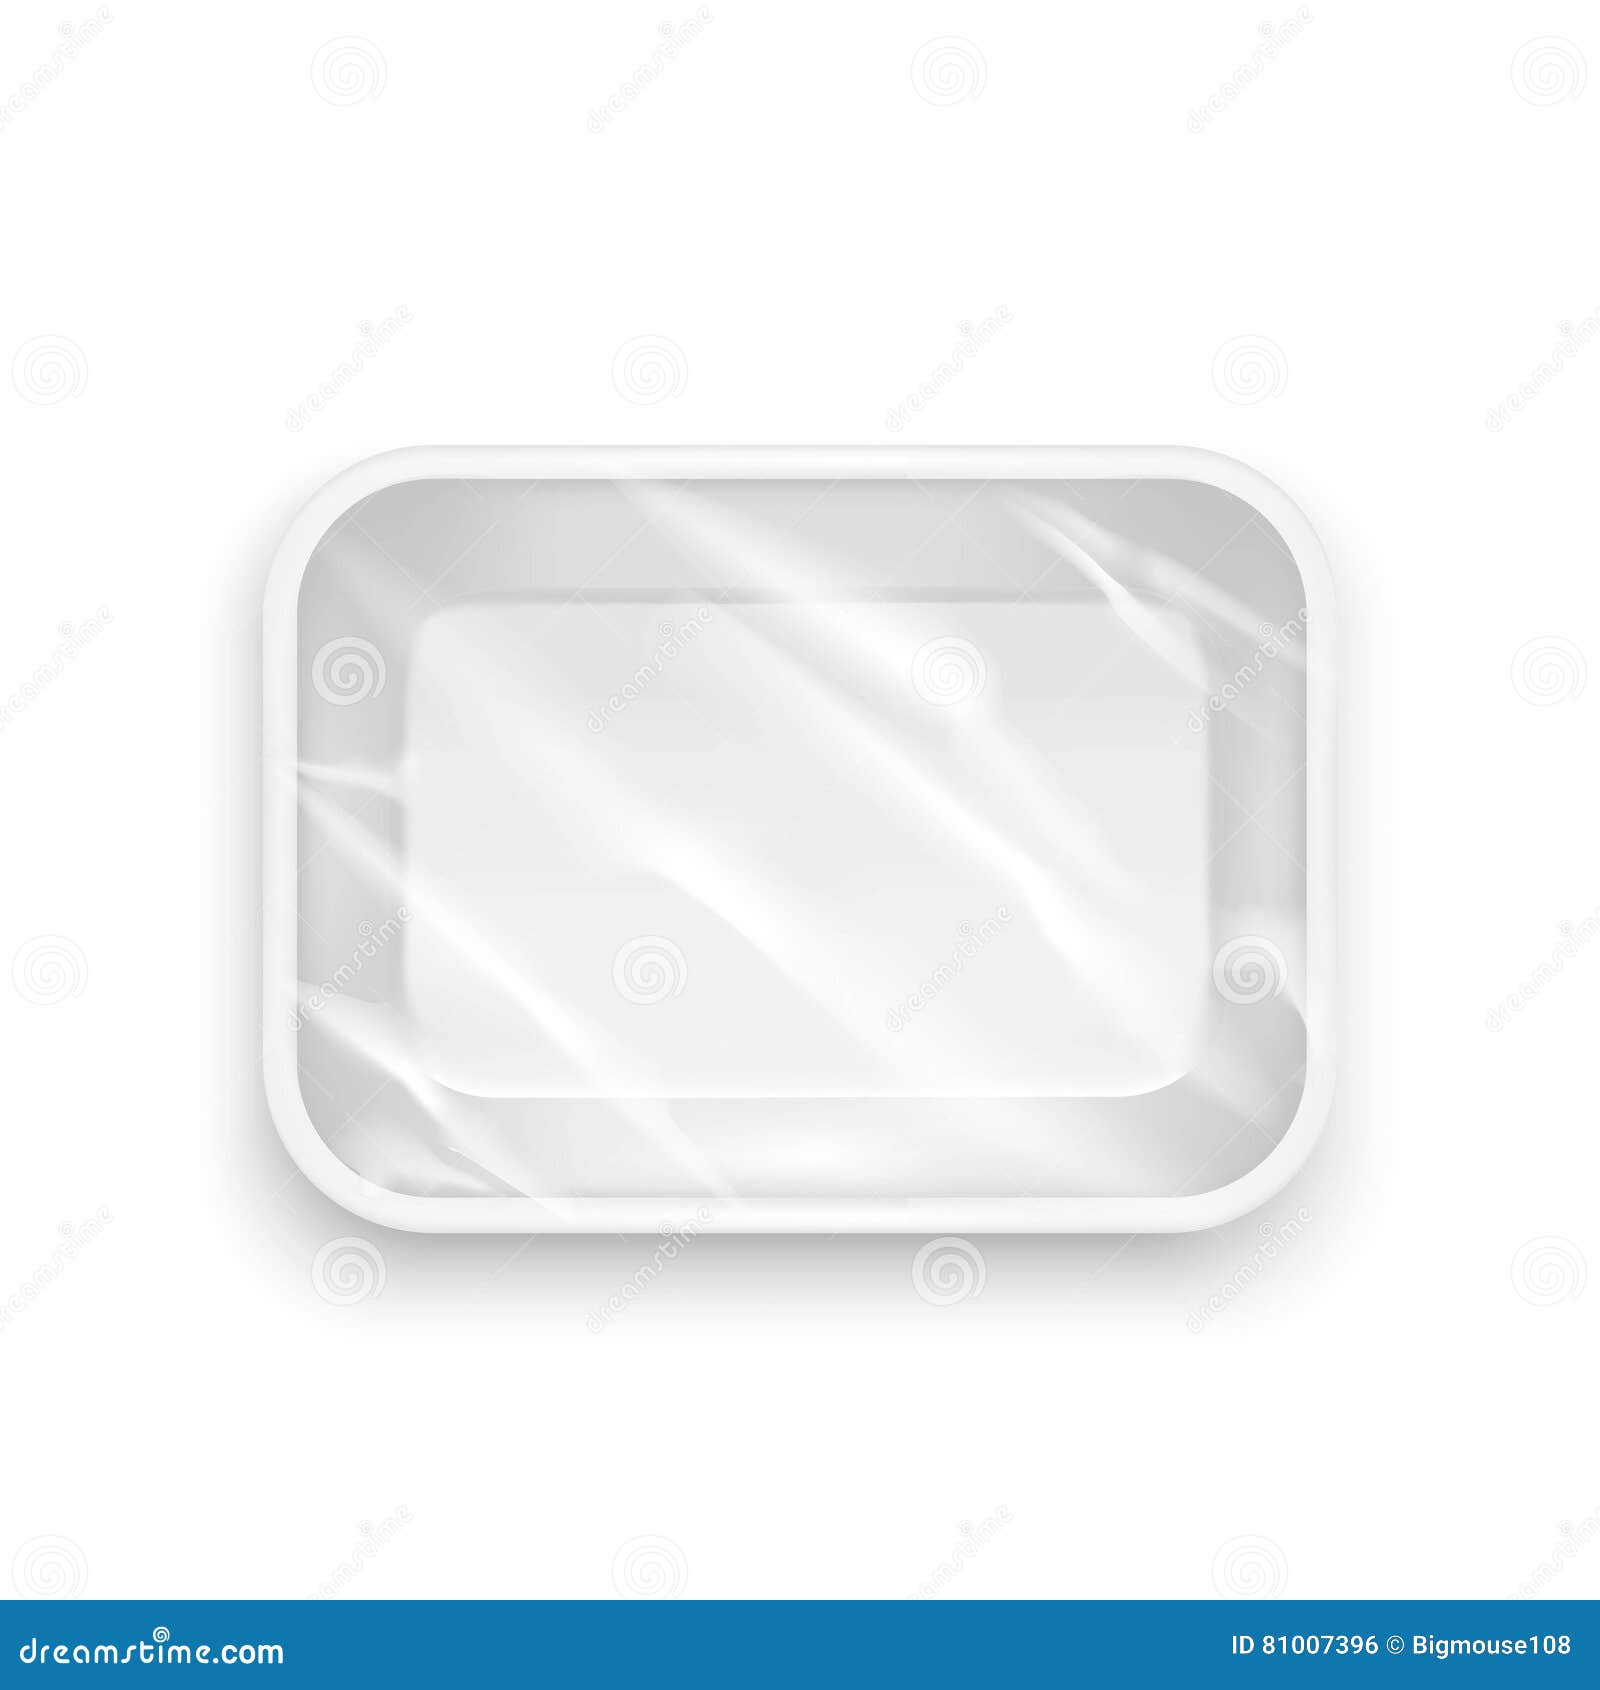 Download Template Blank White Plastic Food Container. Vector Stock ...